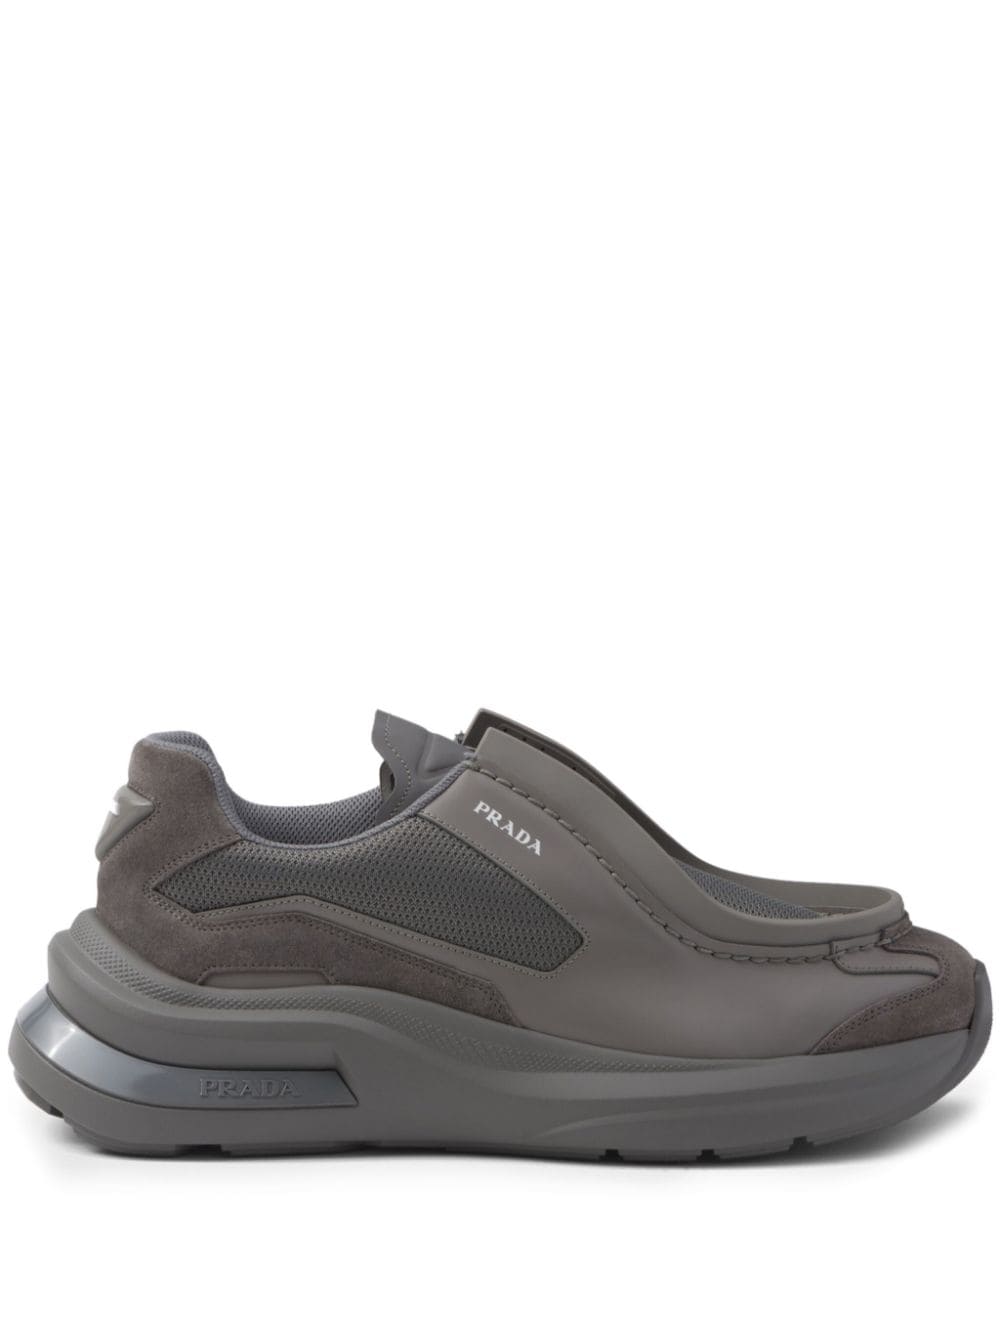 Prada Systeme 60mm panelled sneakers Grey